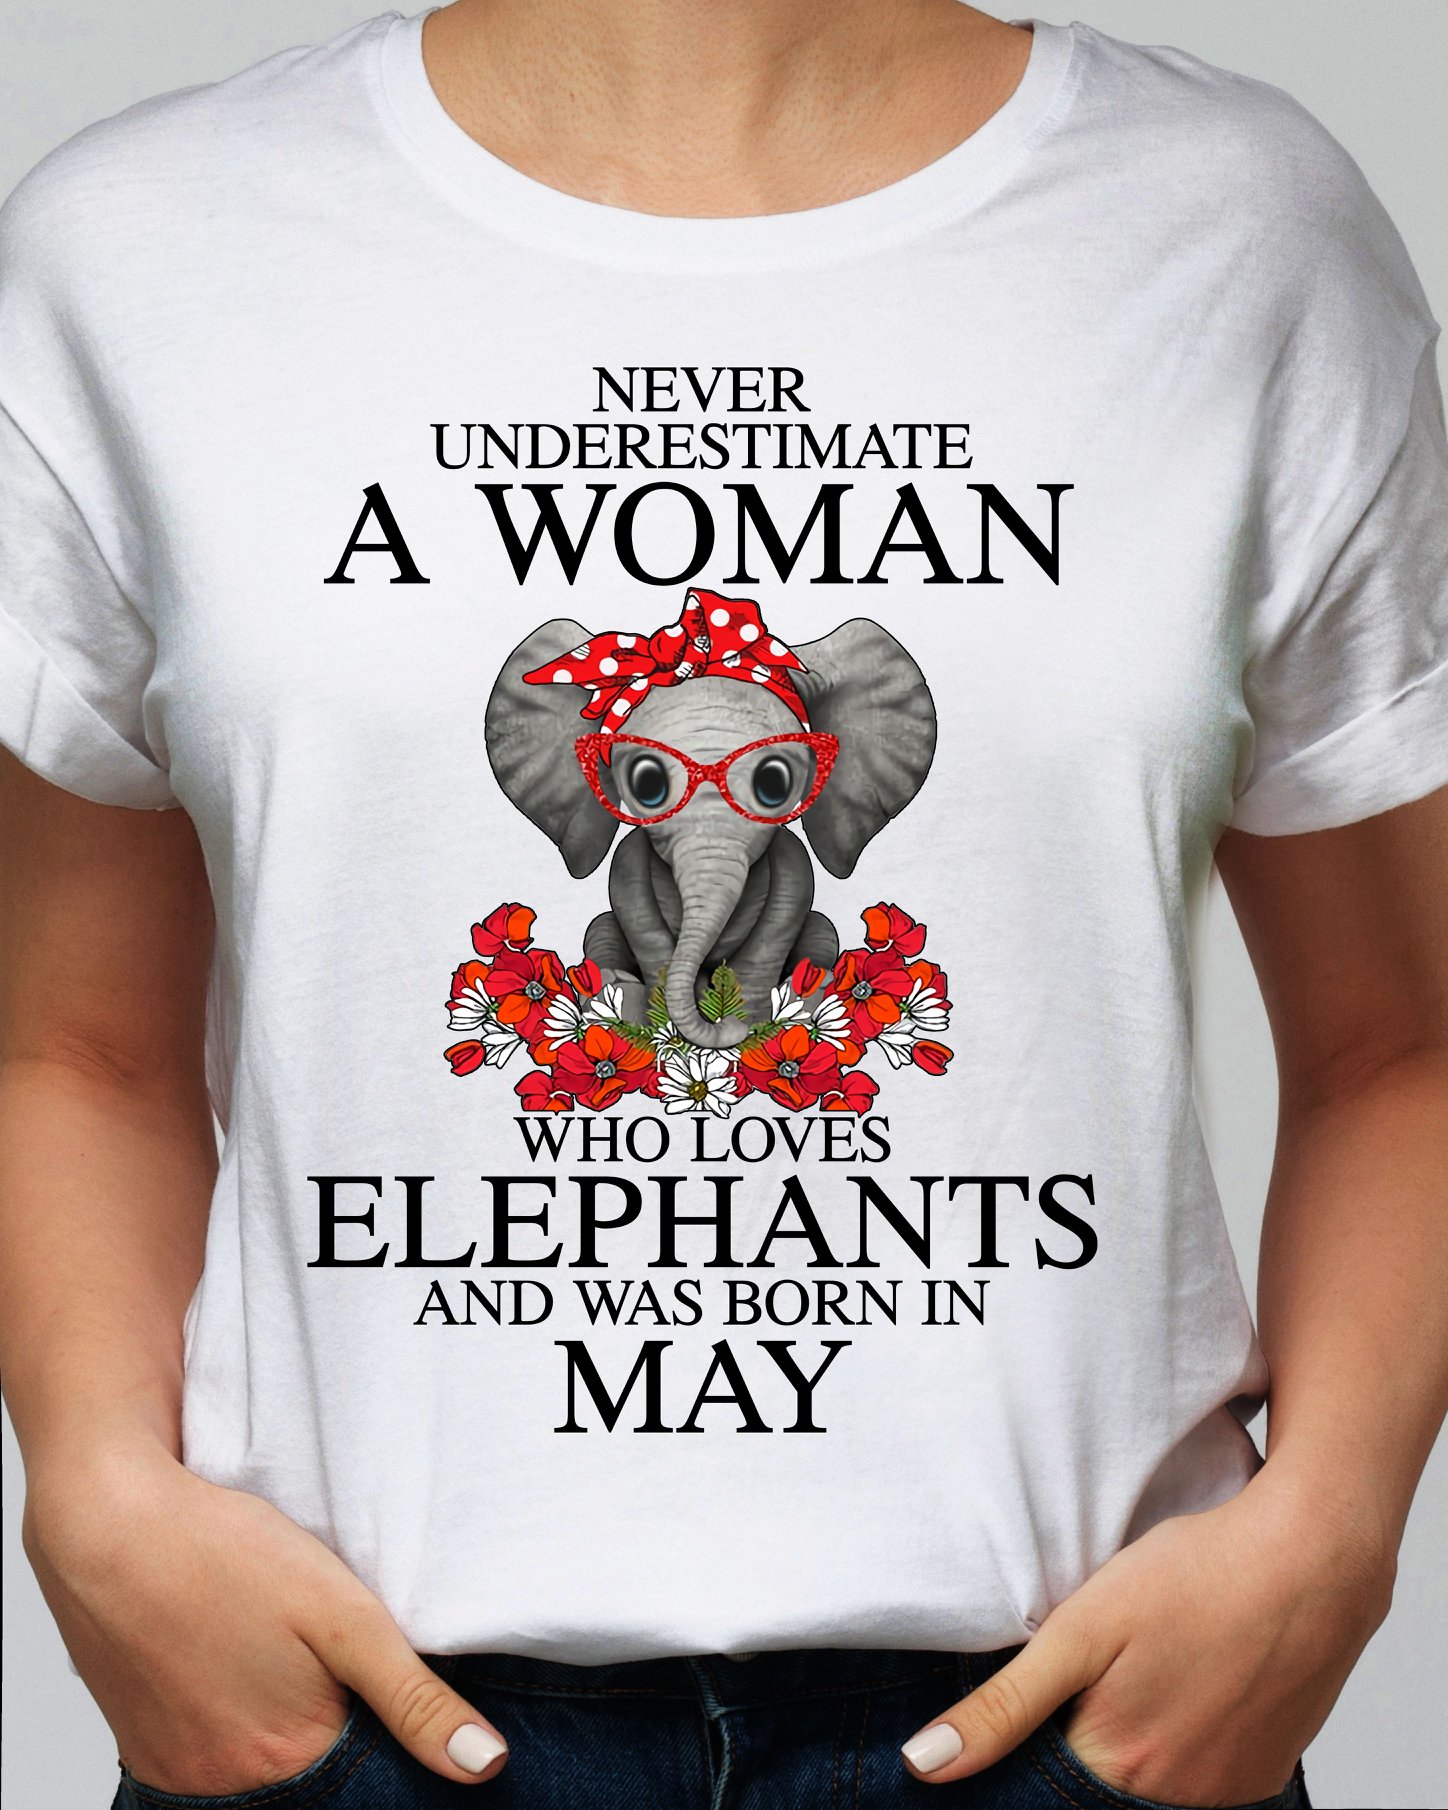 Never underestimate a woman who loves elephants and was born in May